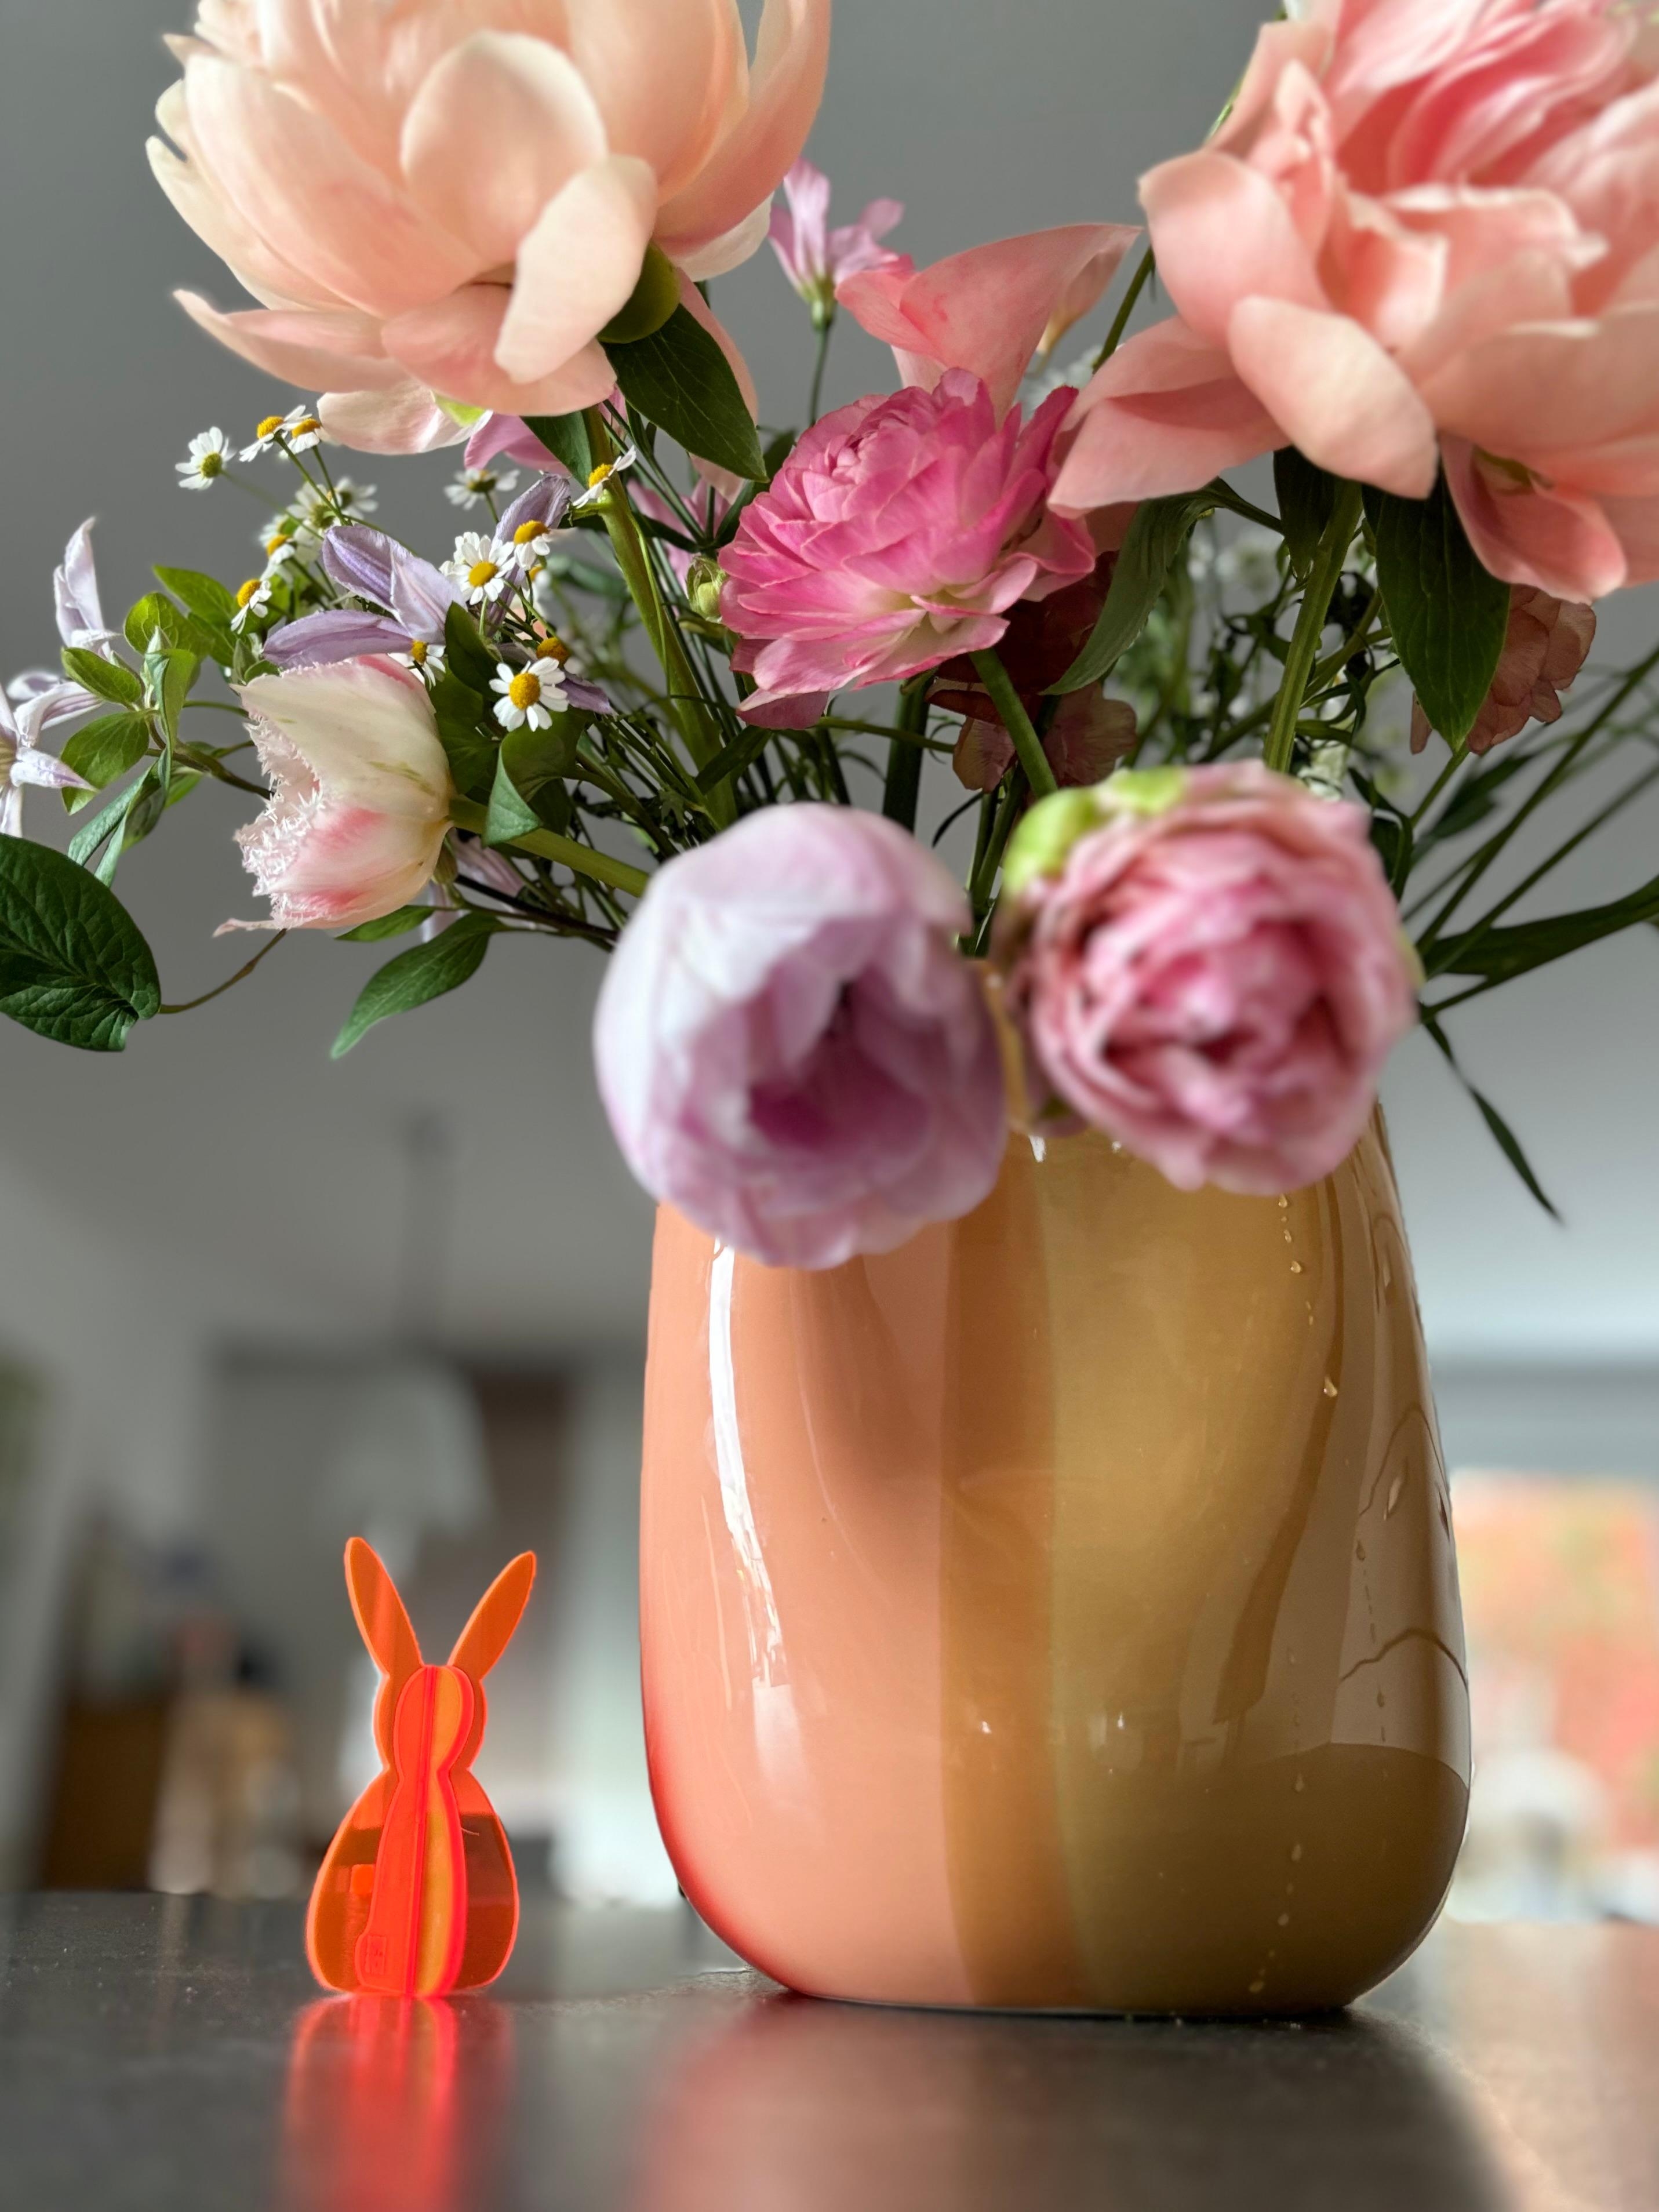 #happy #neon #easter #bunny meets #pastell  #blooms 